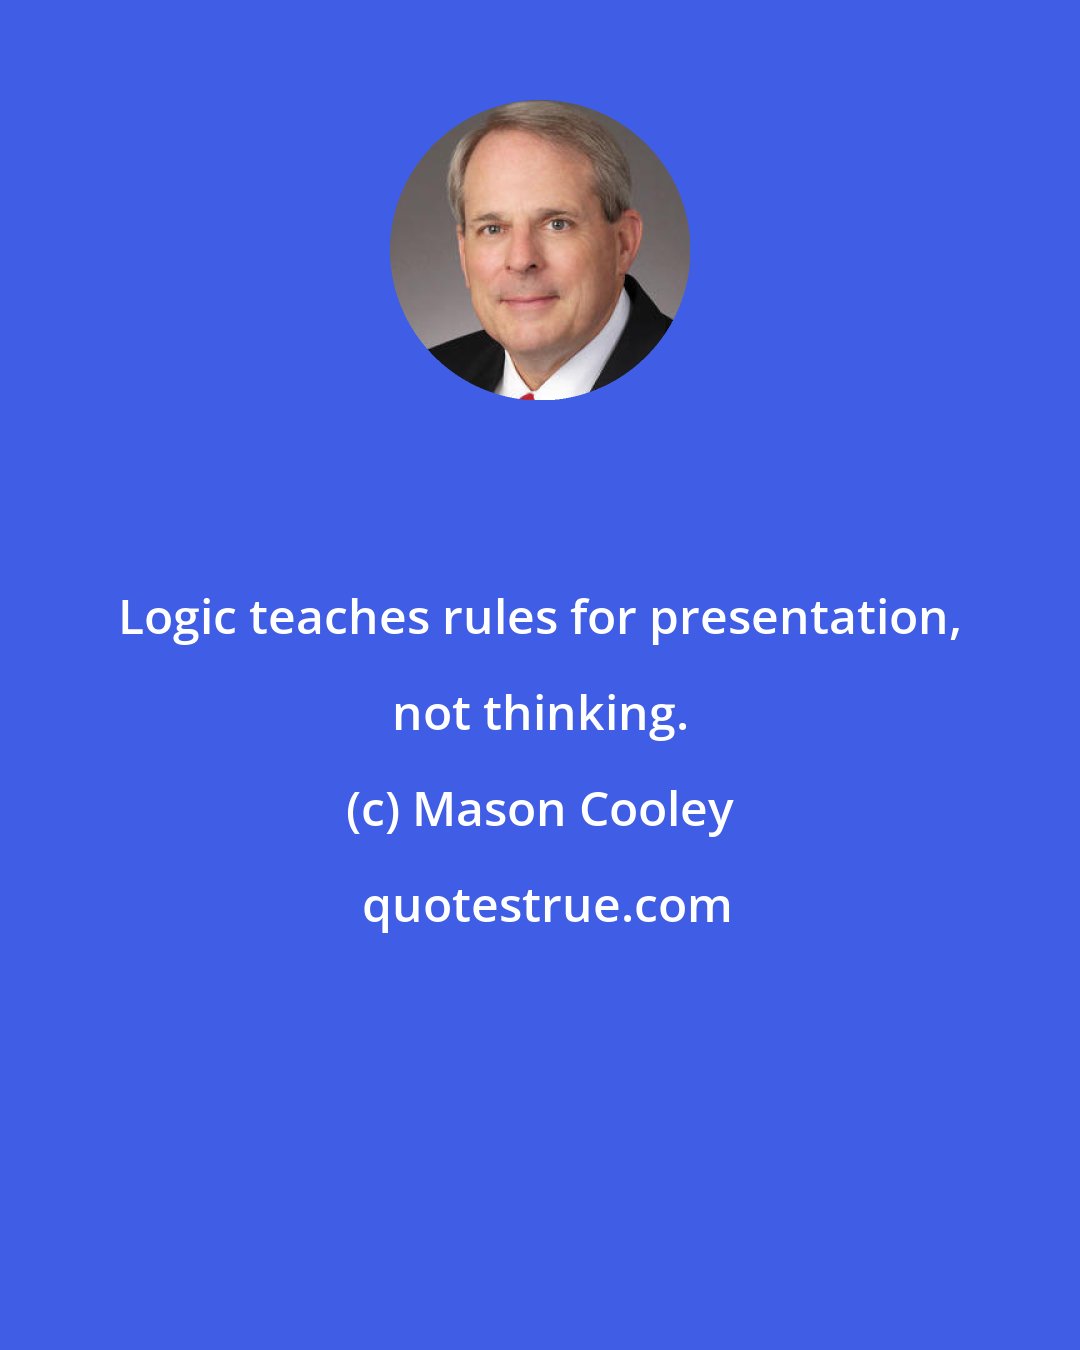 Mason Cooley: Logic teaches rules for presentation, not thinking.